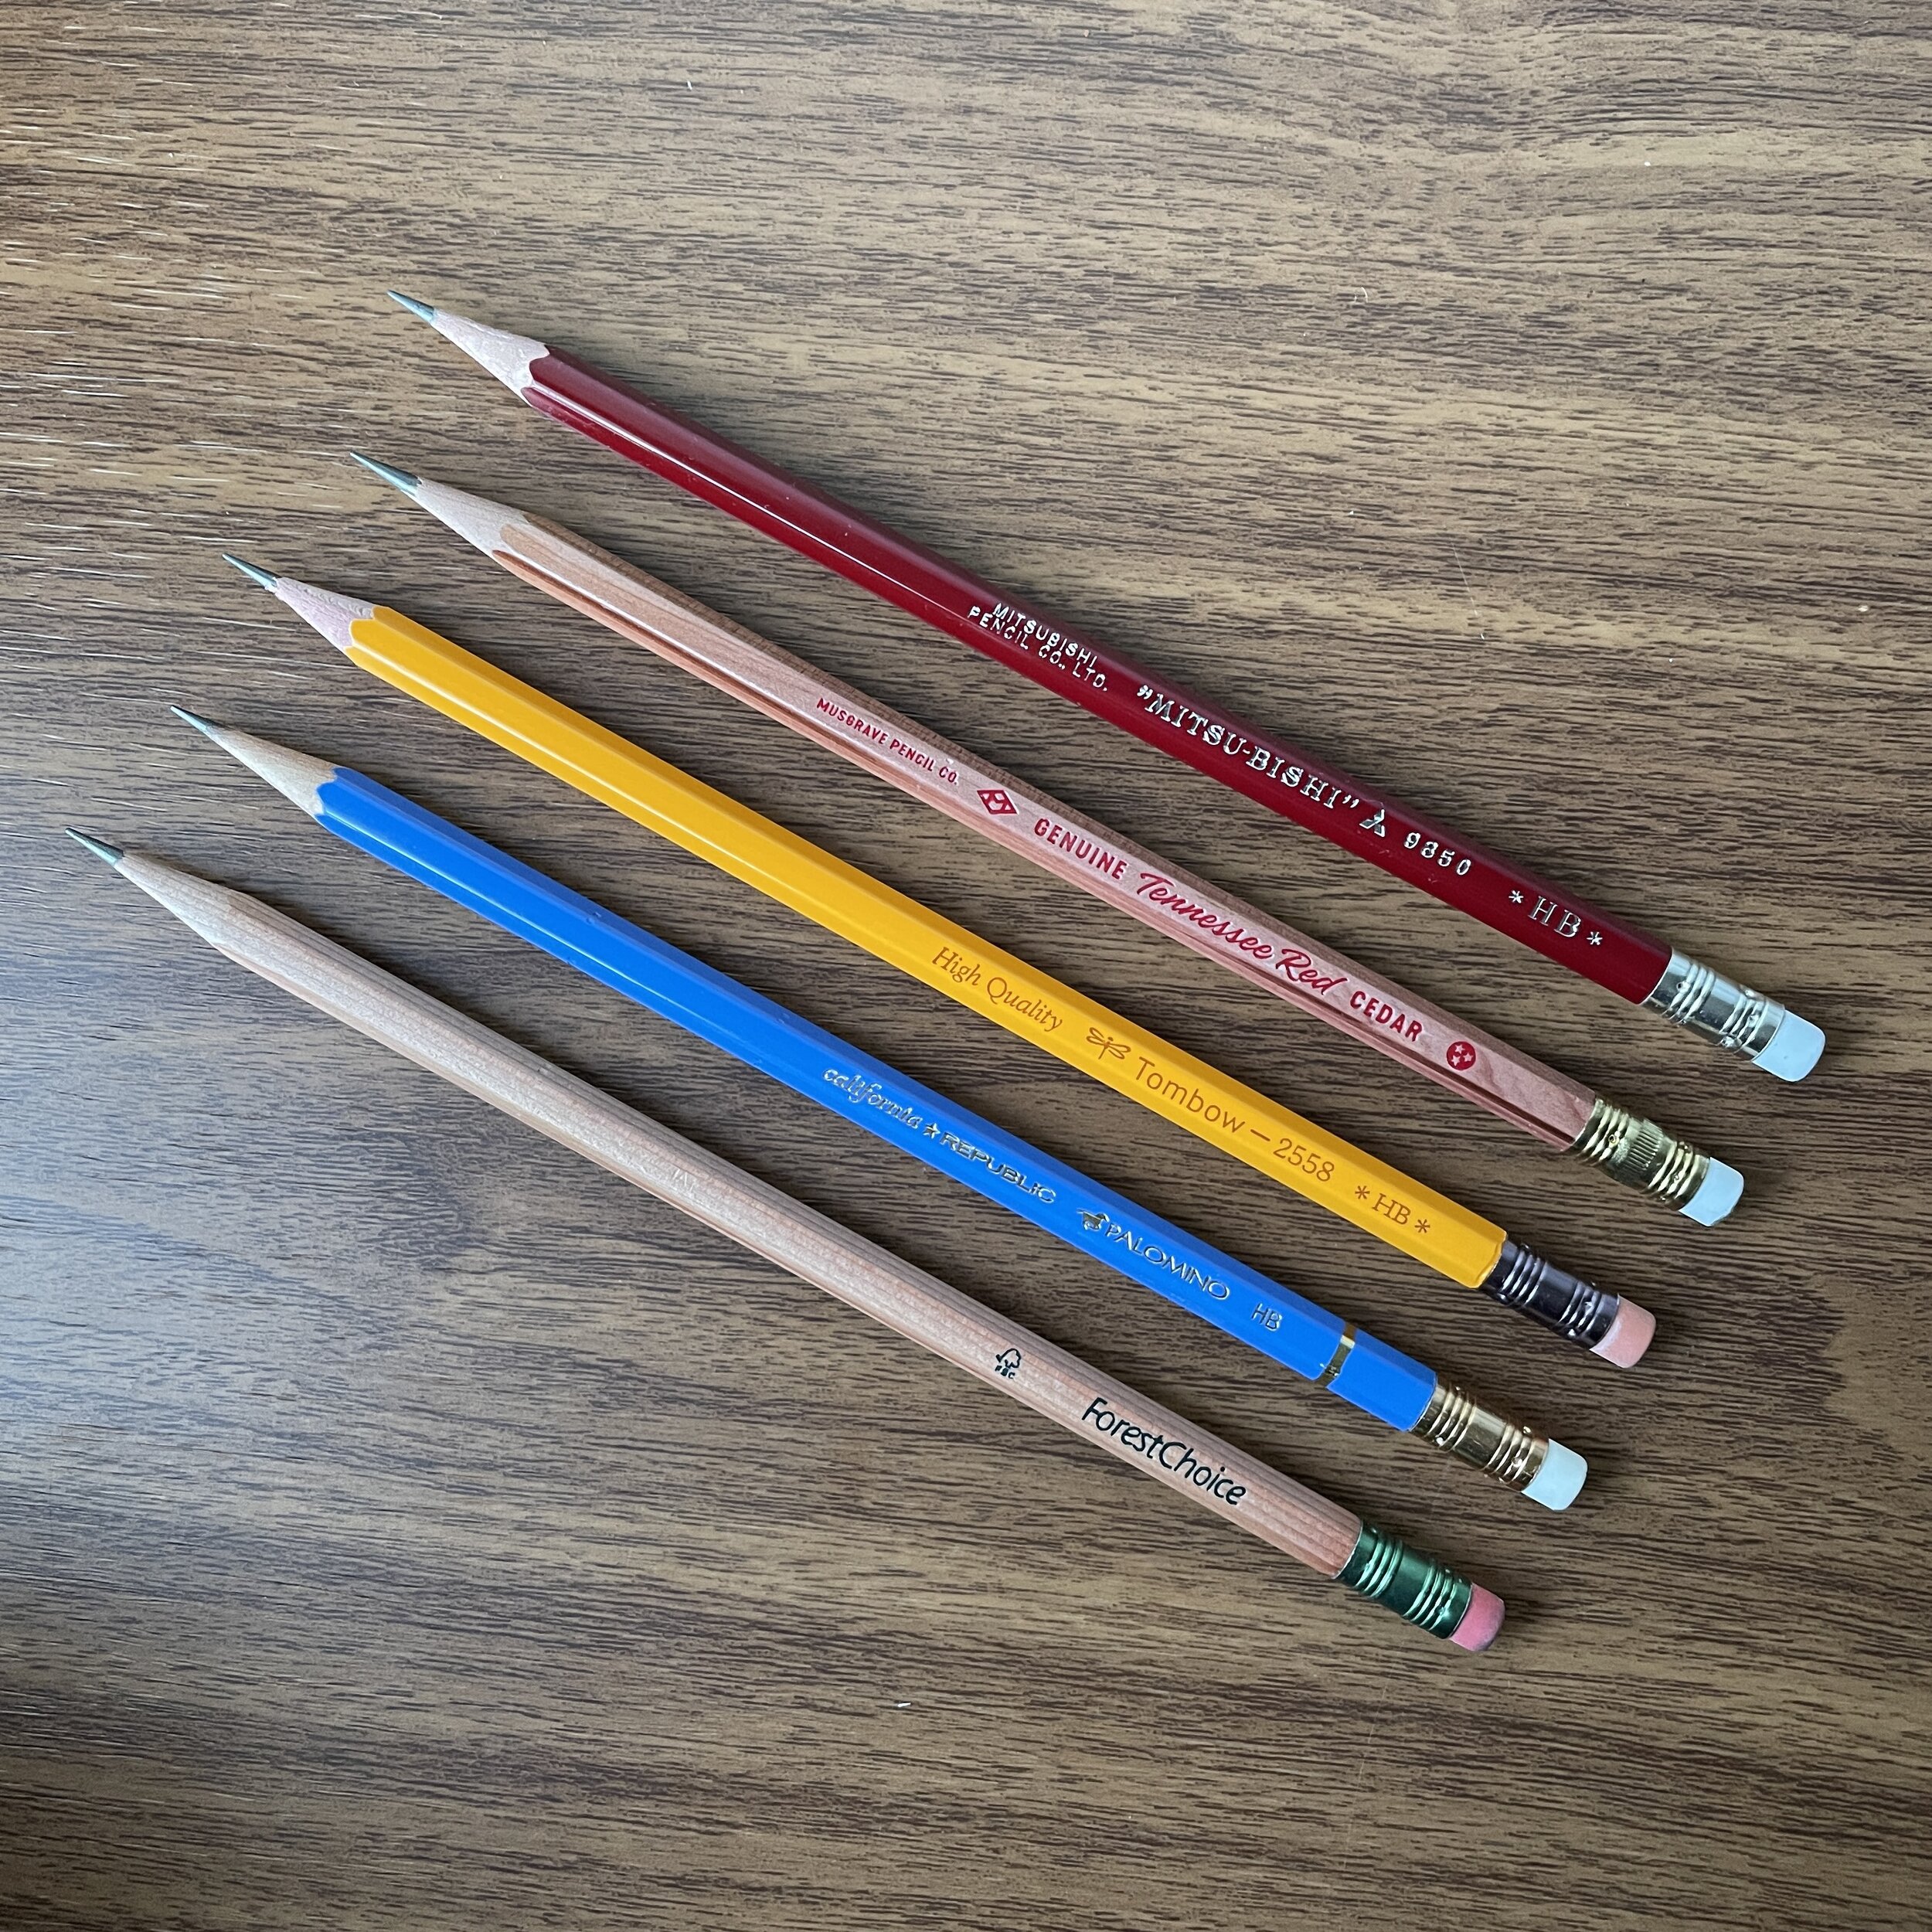 The Best Pencils for Writing and Schoolwork 